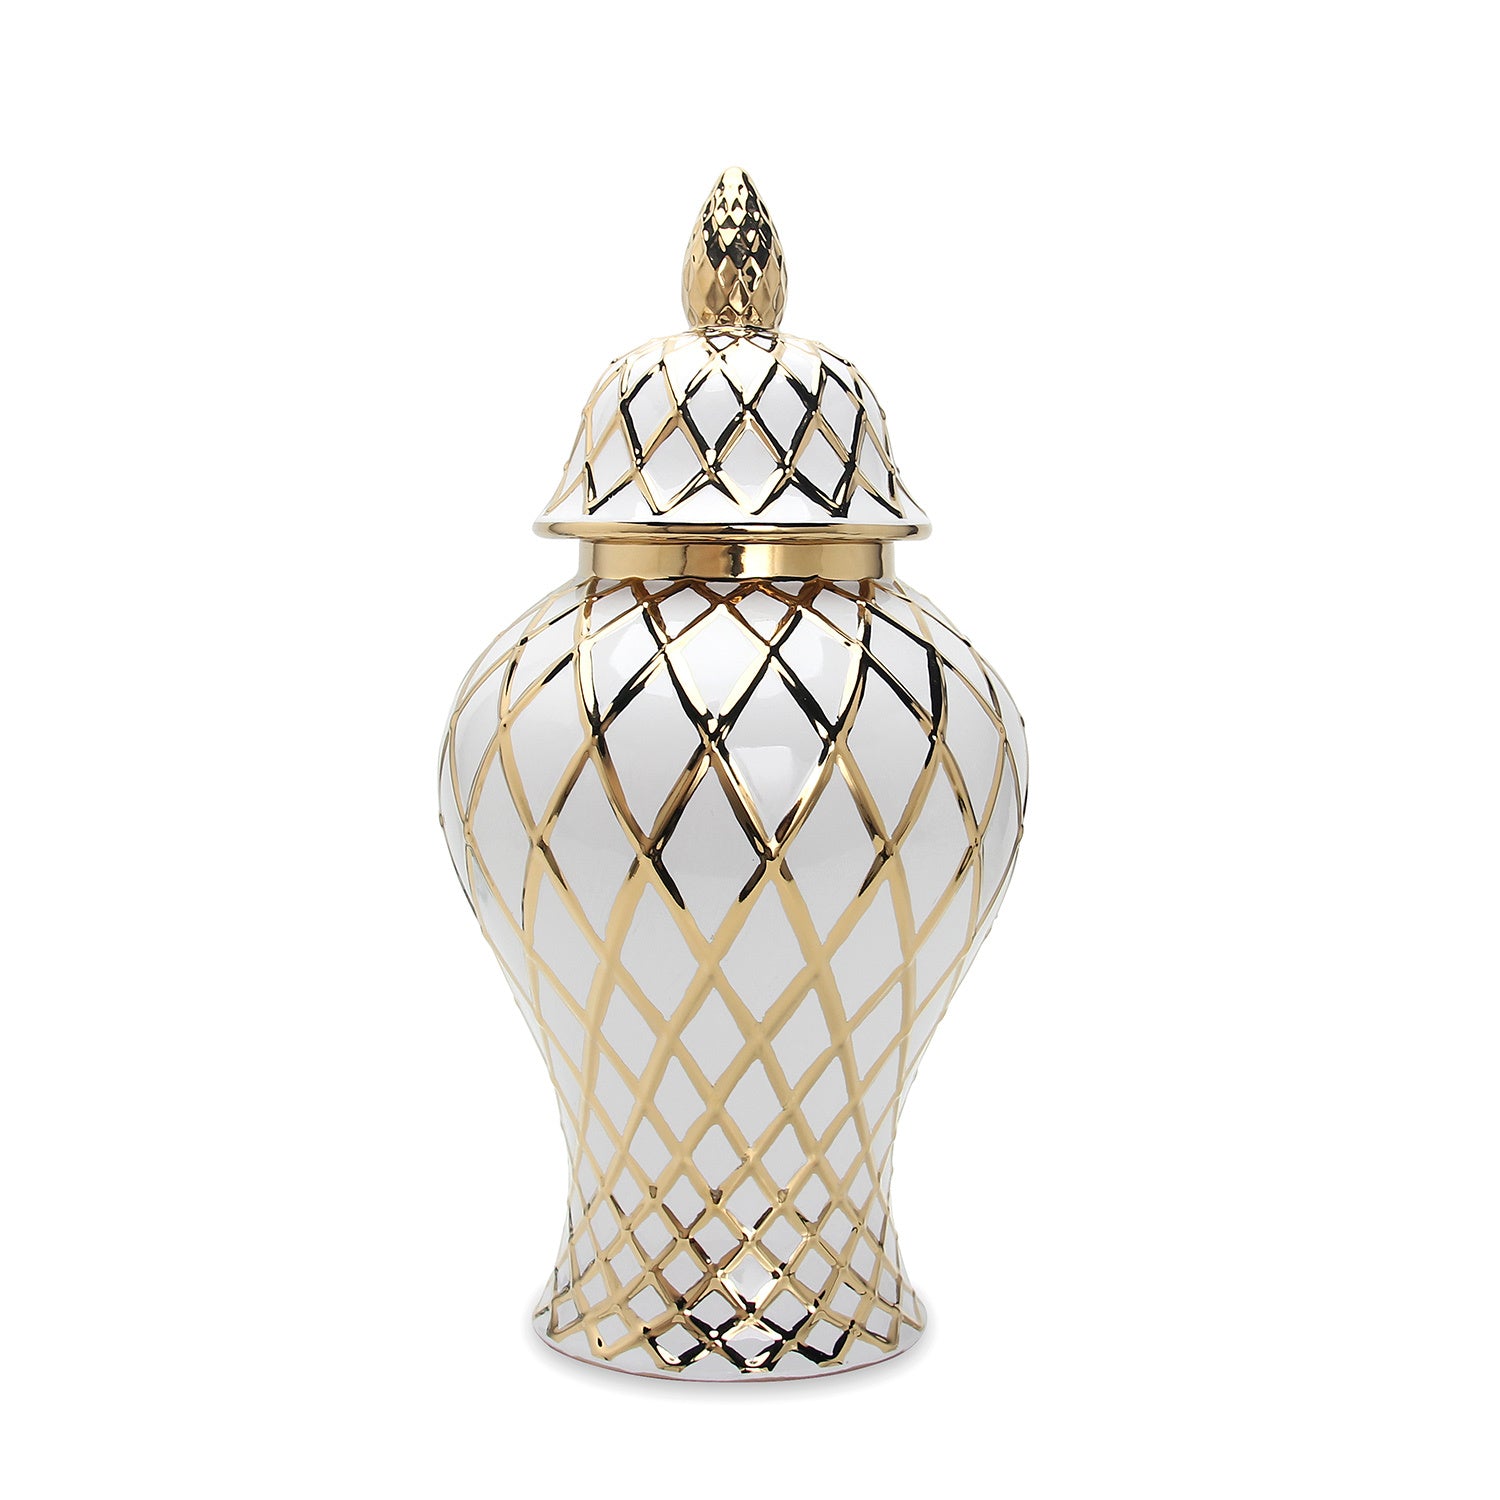 A White and Gold Ceramic Decorative Ginger Jar Vase on a white background.